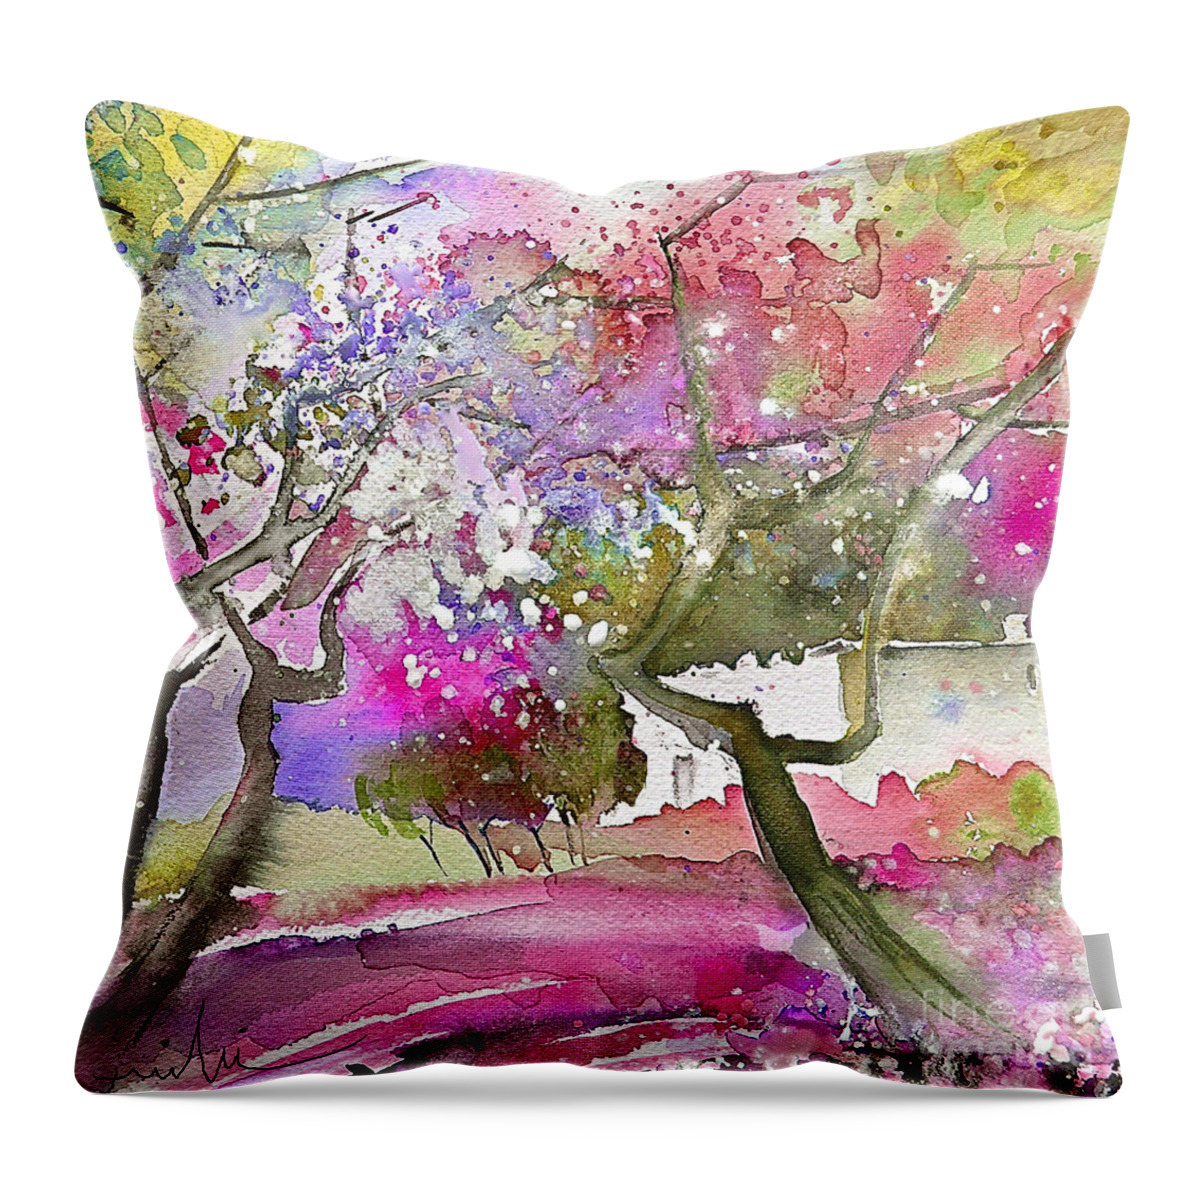 Spain Rioja Painting Travel Sketch Water Colour Miki Throw Pillow featuring the painting Rioja Spain 02 by Miki De Goodaboom